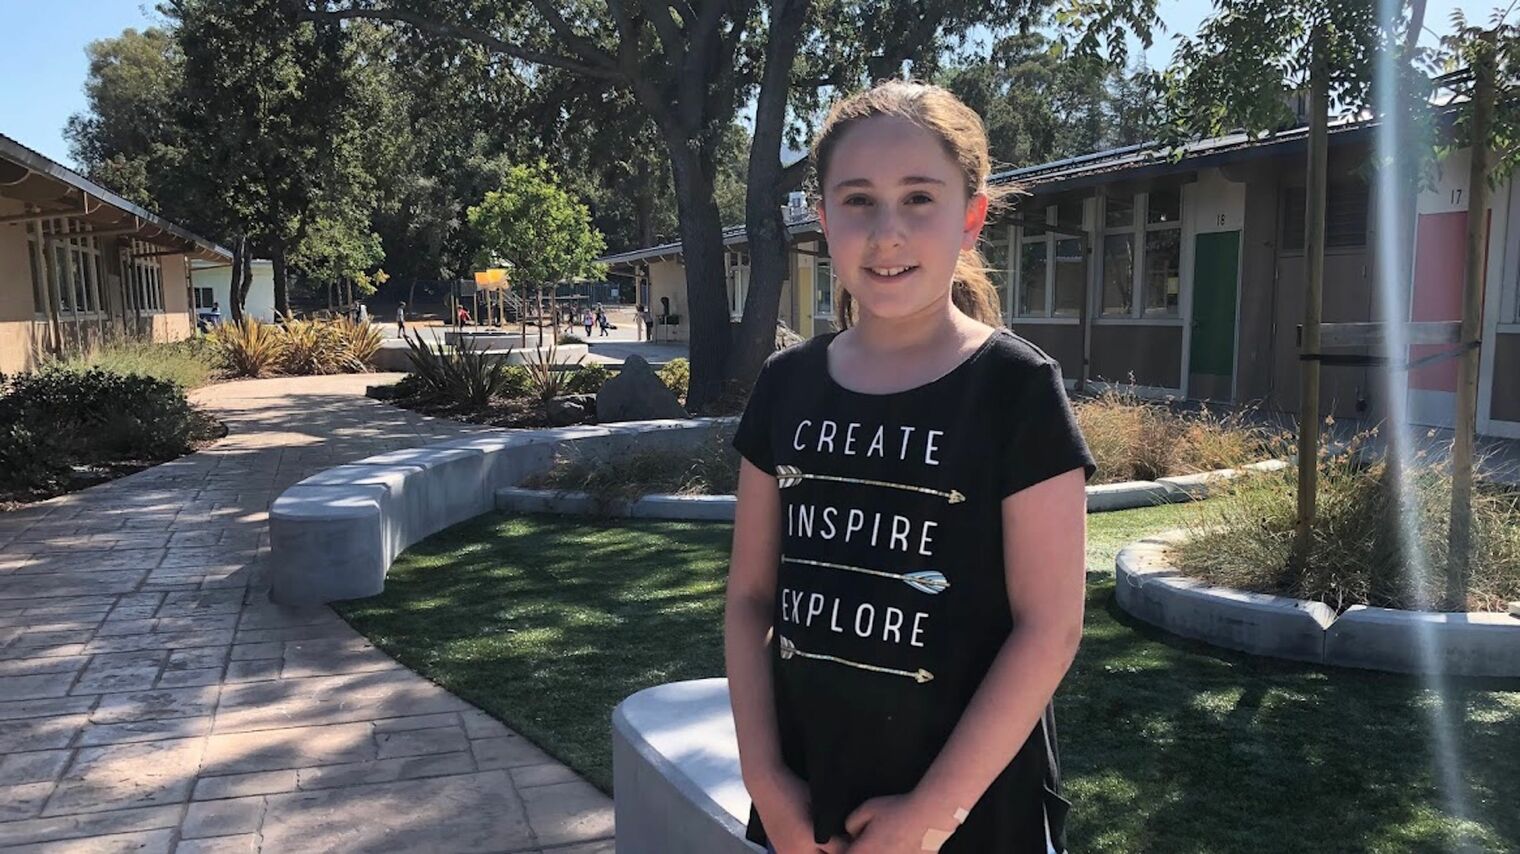 One girl standing, smiling at the camera and wearing a shirt that says Creating, Inspiring, Exploring.